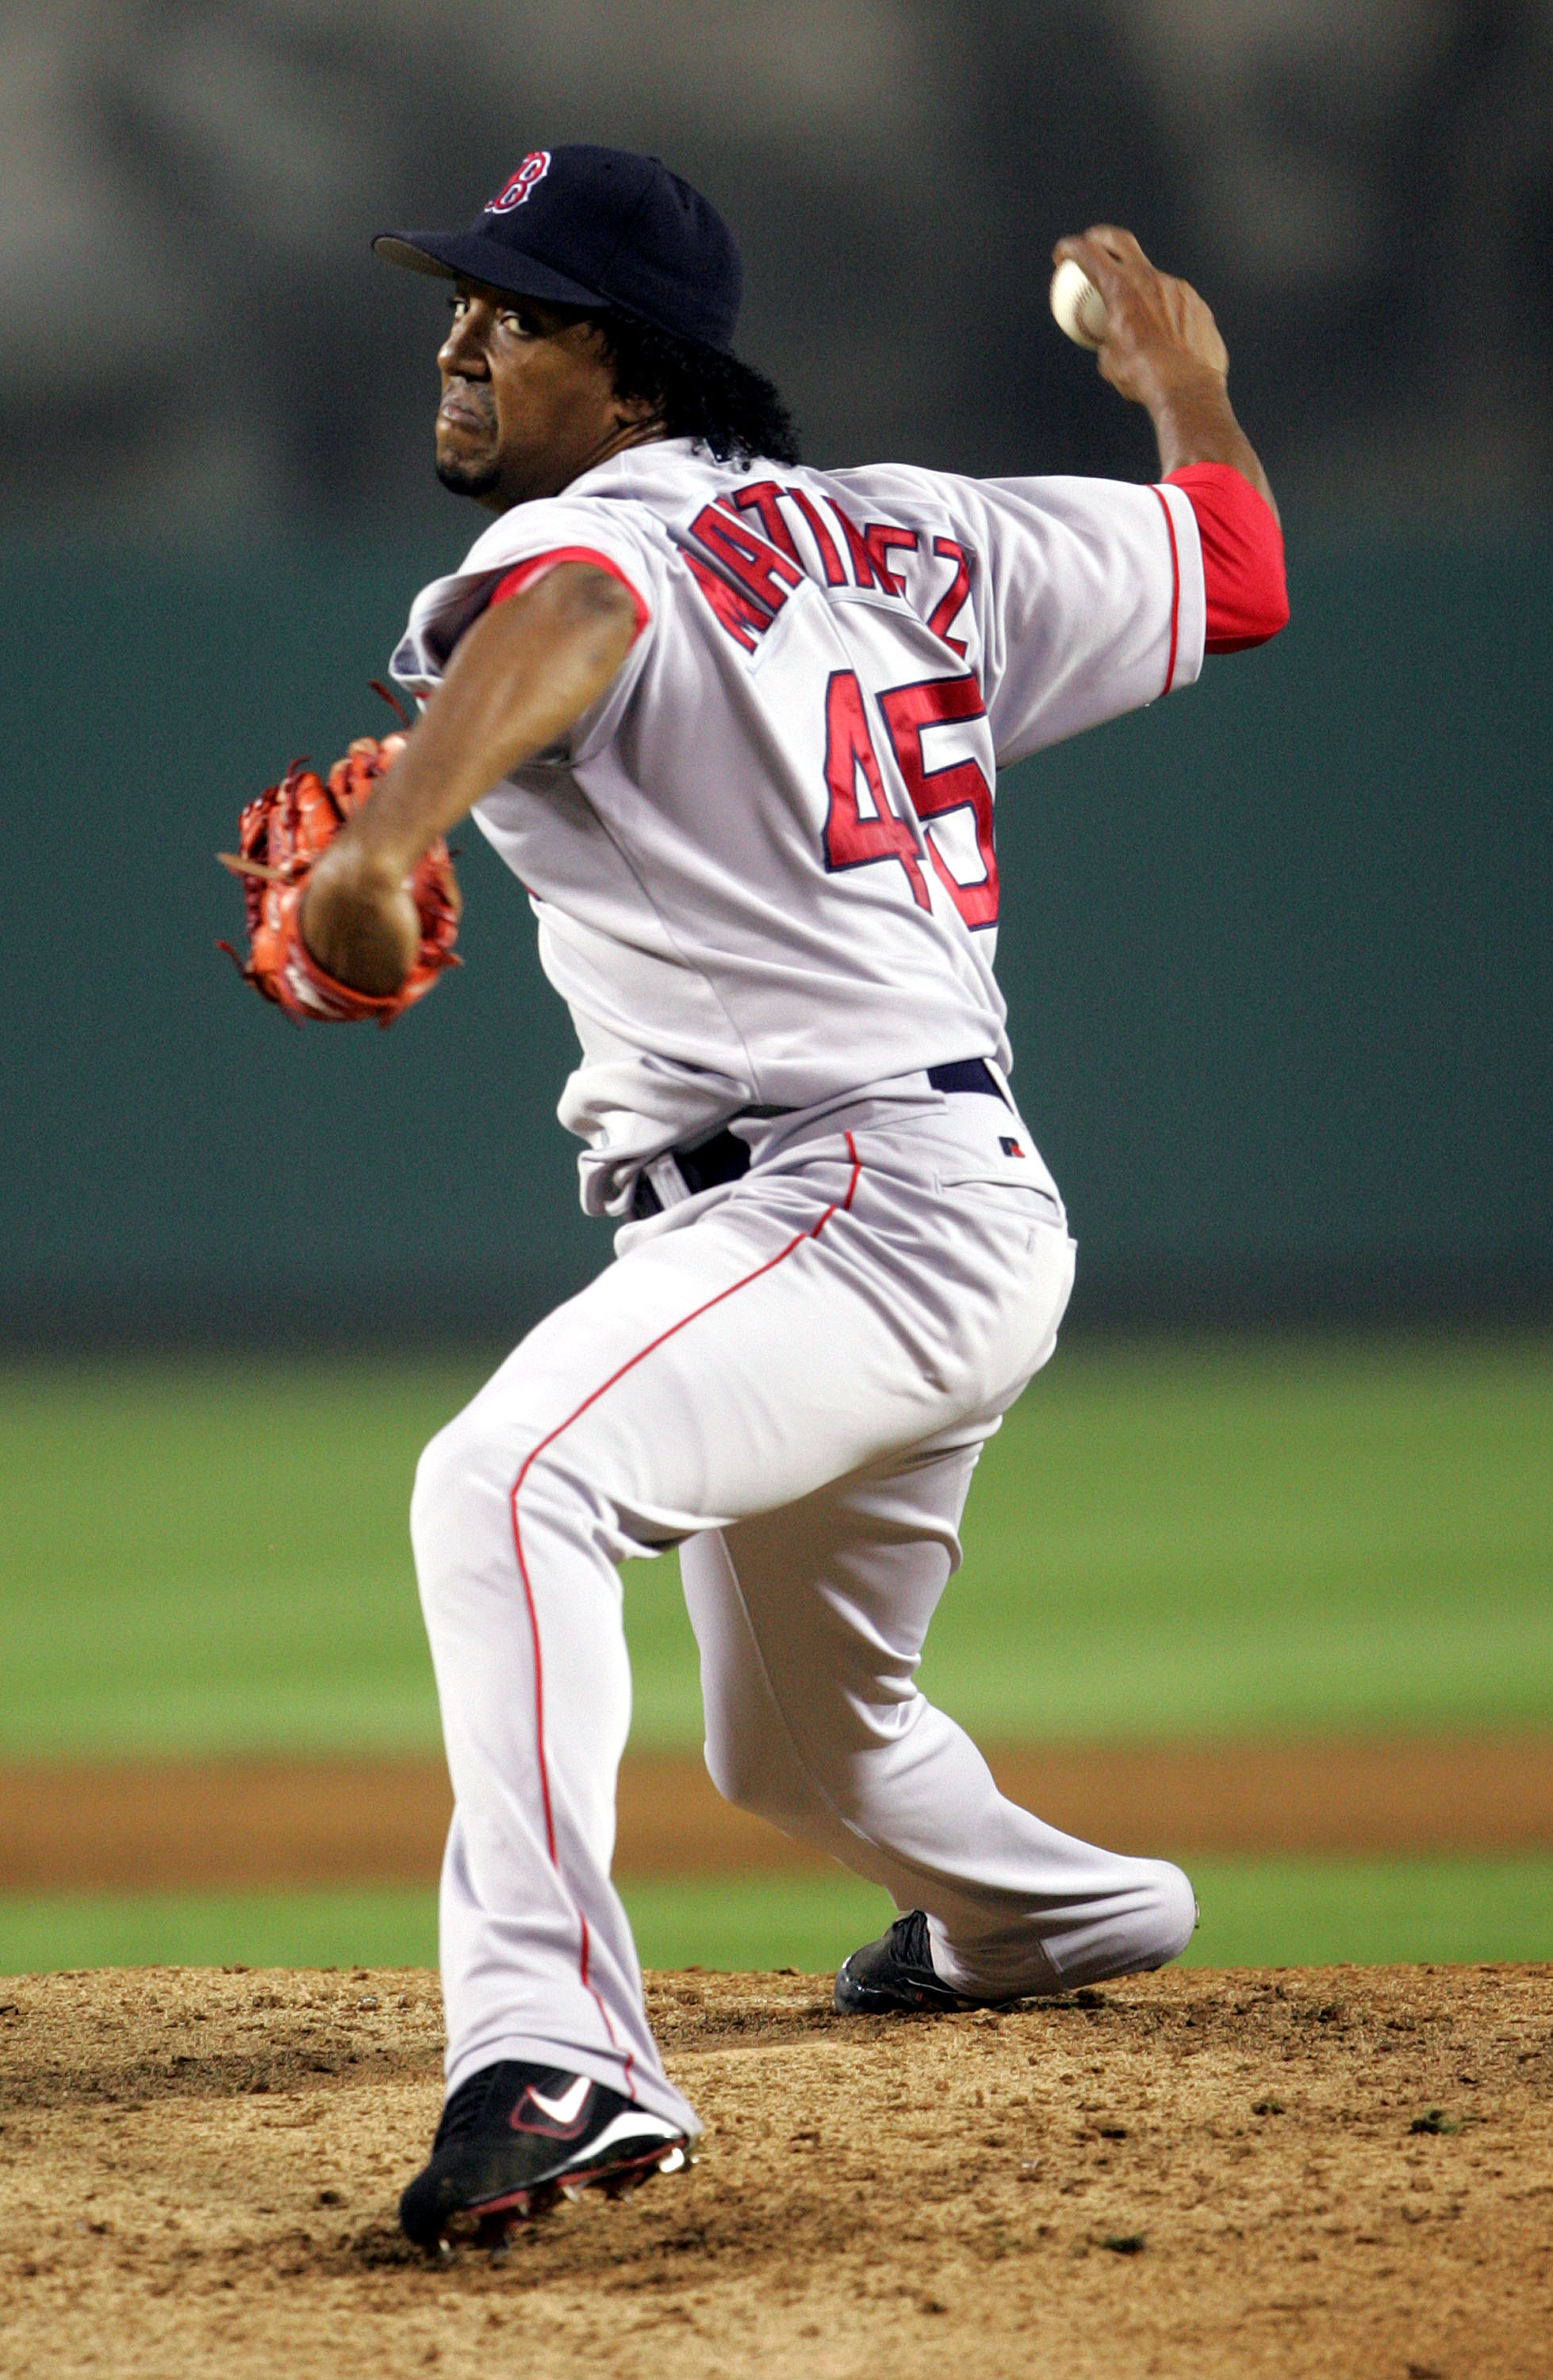 ANAHEIM, CA - OCTOBER 6:  Pitcher Pedro Martinez #45 of the Boston Red Sox delivers a pitch during the American League Division Series with the Anaheim Angels, Game Two on October 6, 2004 at Angels Stadium at Anaheim in Anaheim, California.   (Photo by St